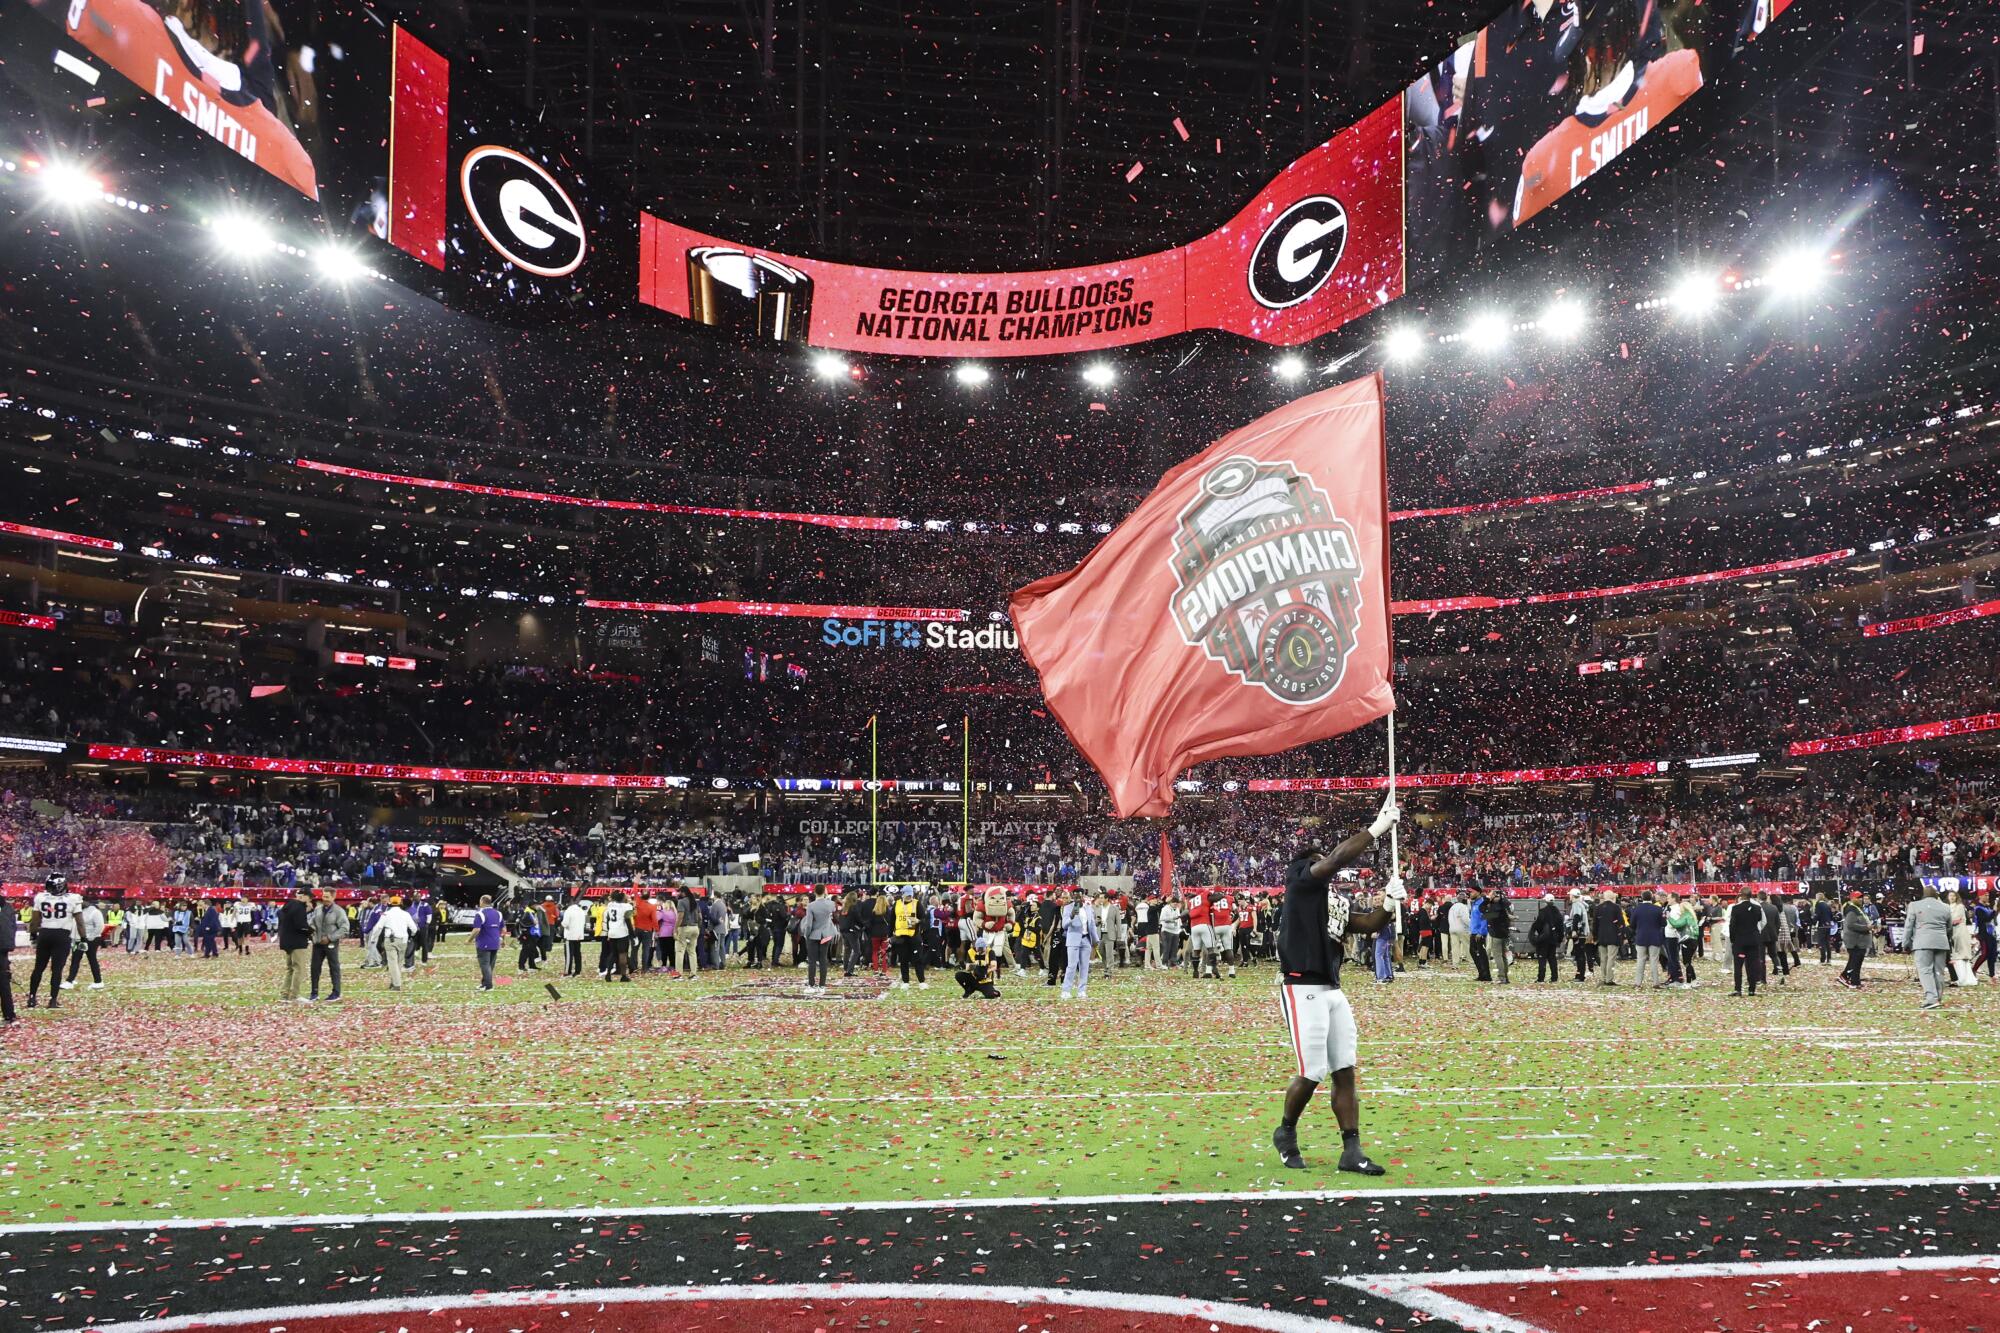 CFP National Championship game: Who is favored to win?